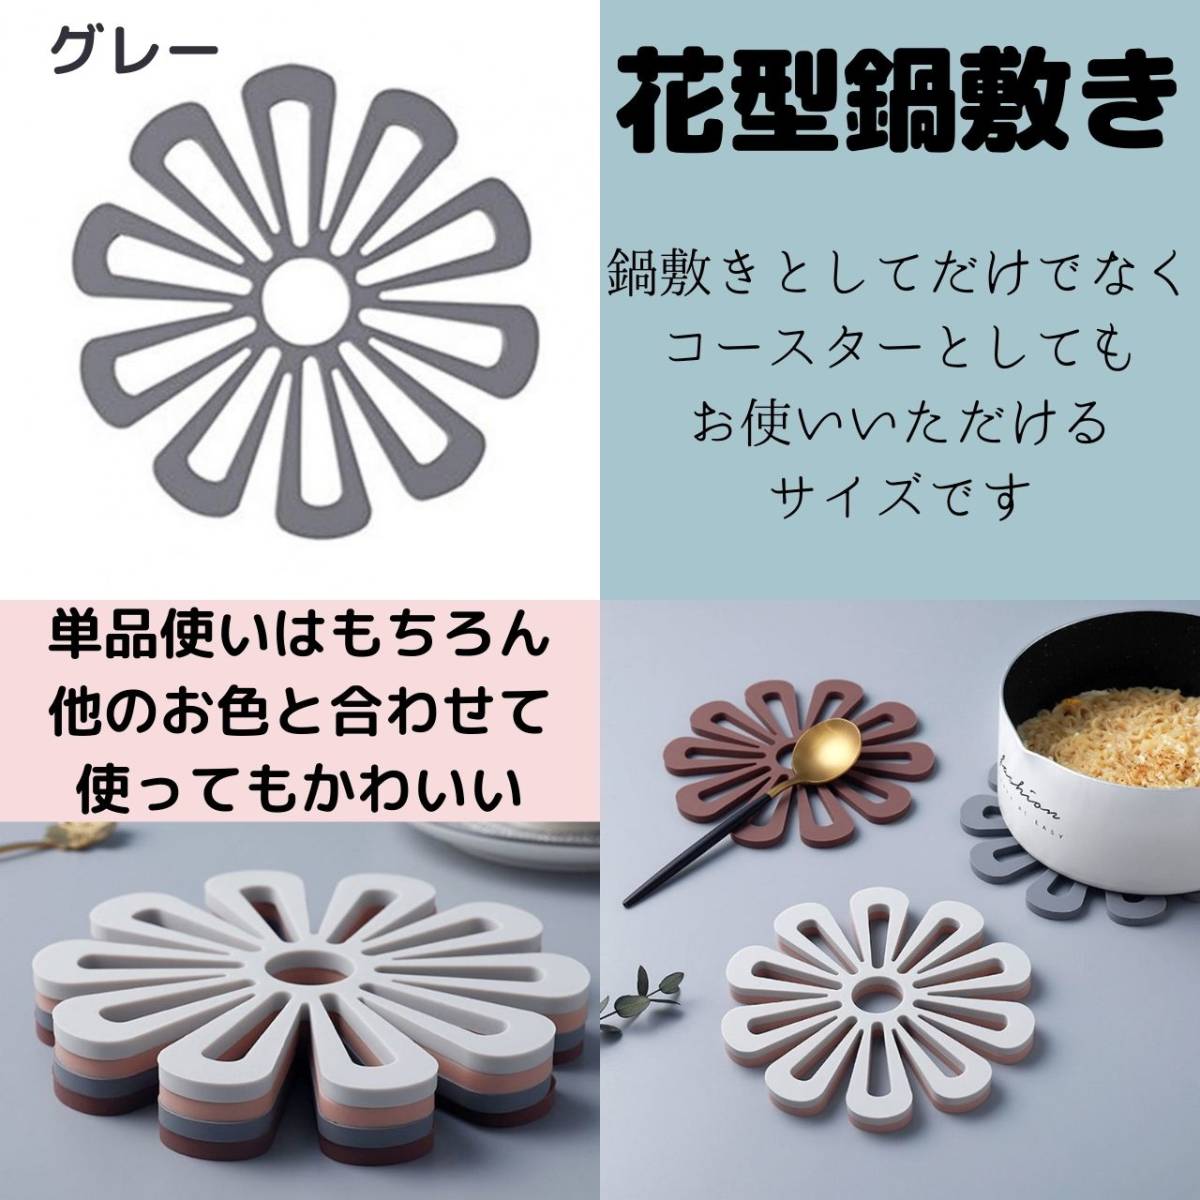 wanderout WIRE POT STAND SILVER 鍋敷き ブラック｜PayPayフリマ